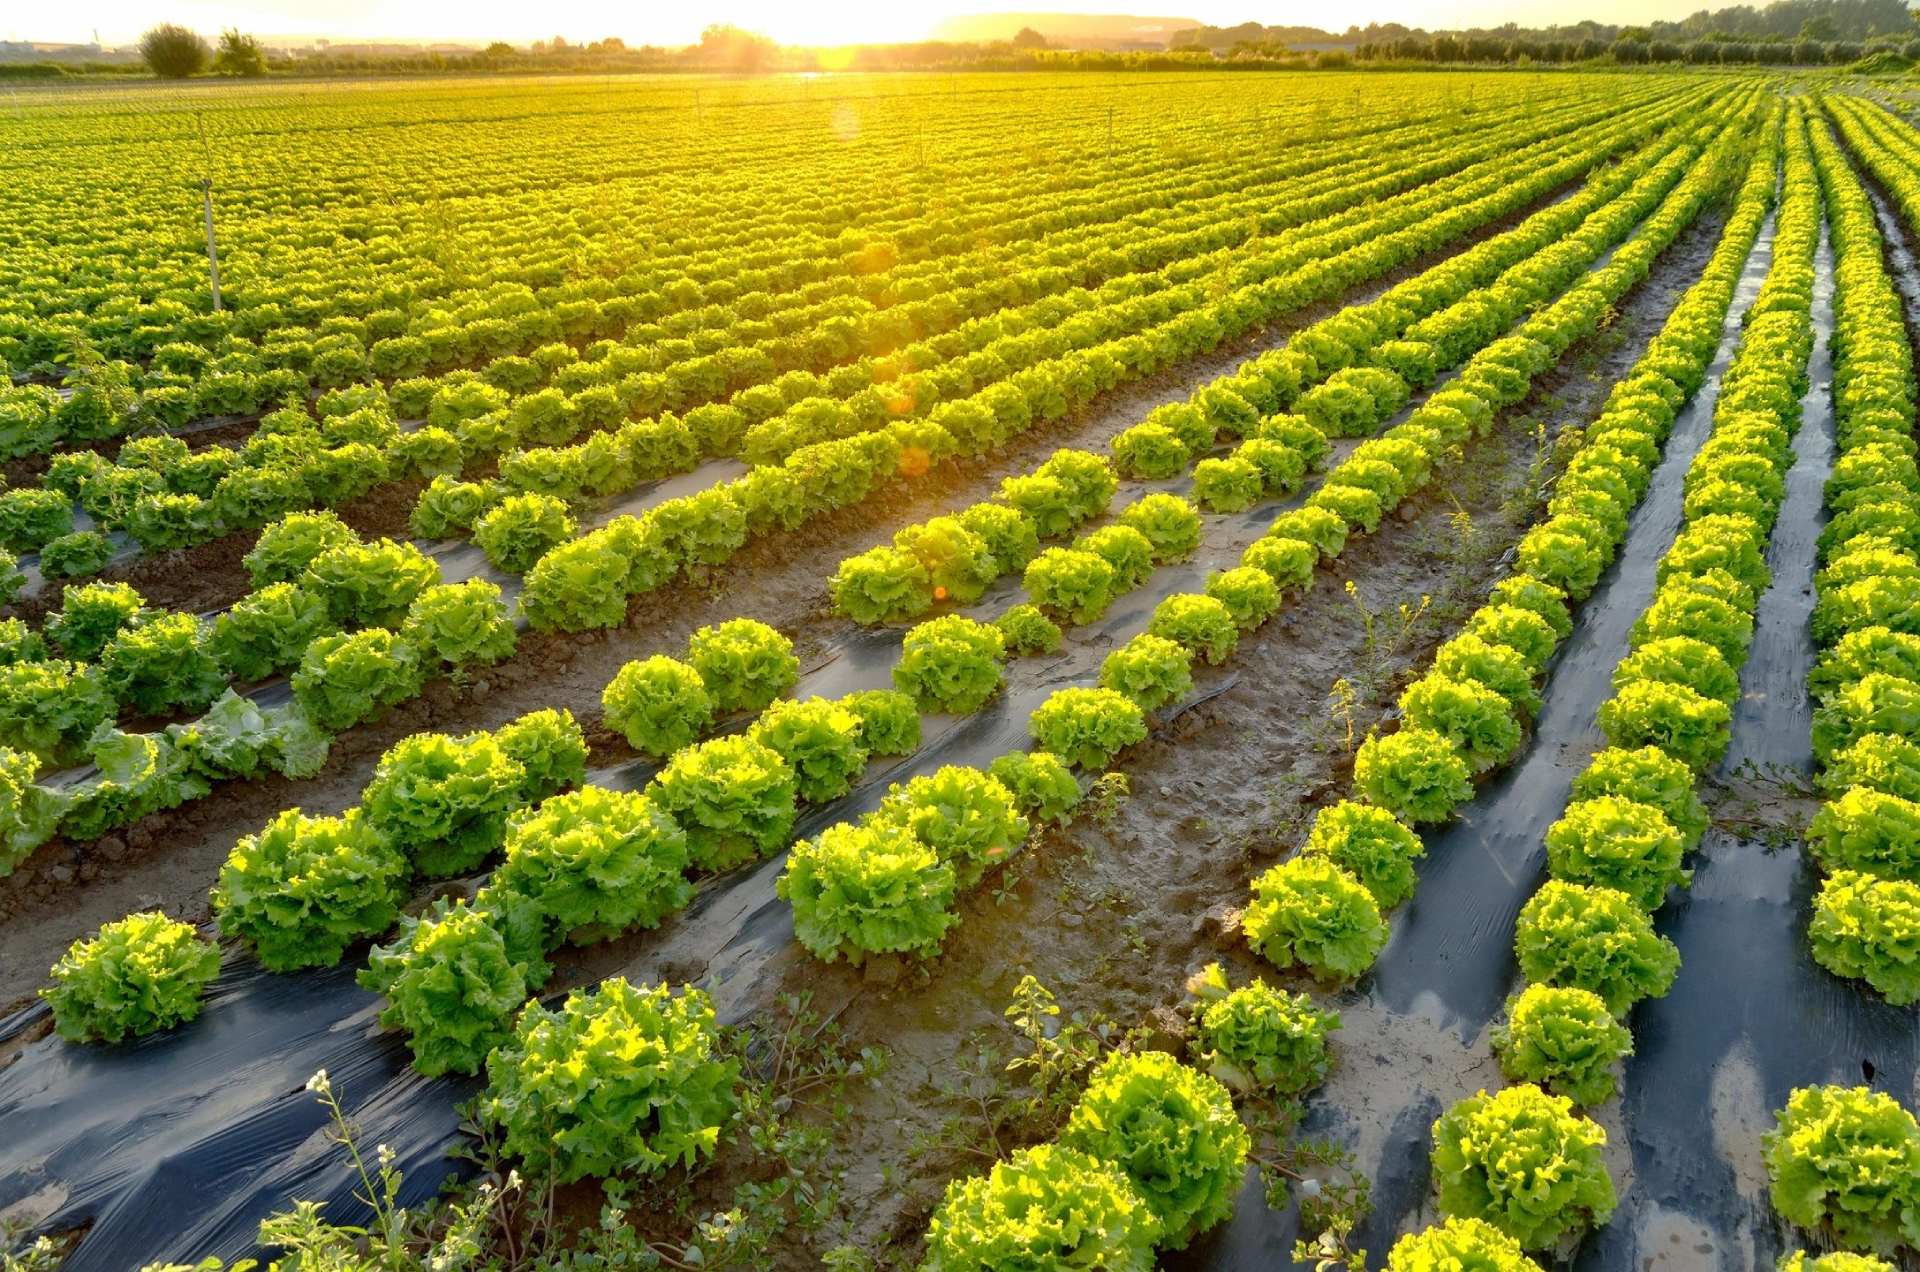 A field of lettuce growing in the middle of a green field.